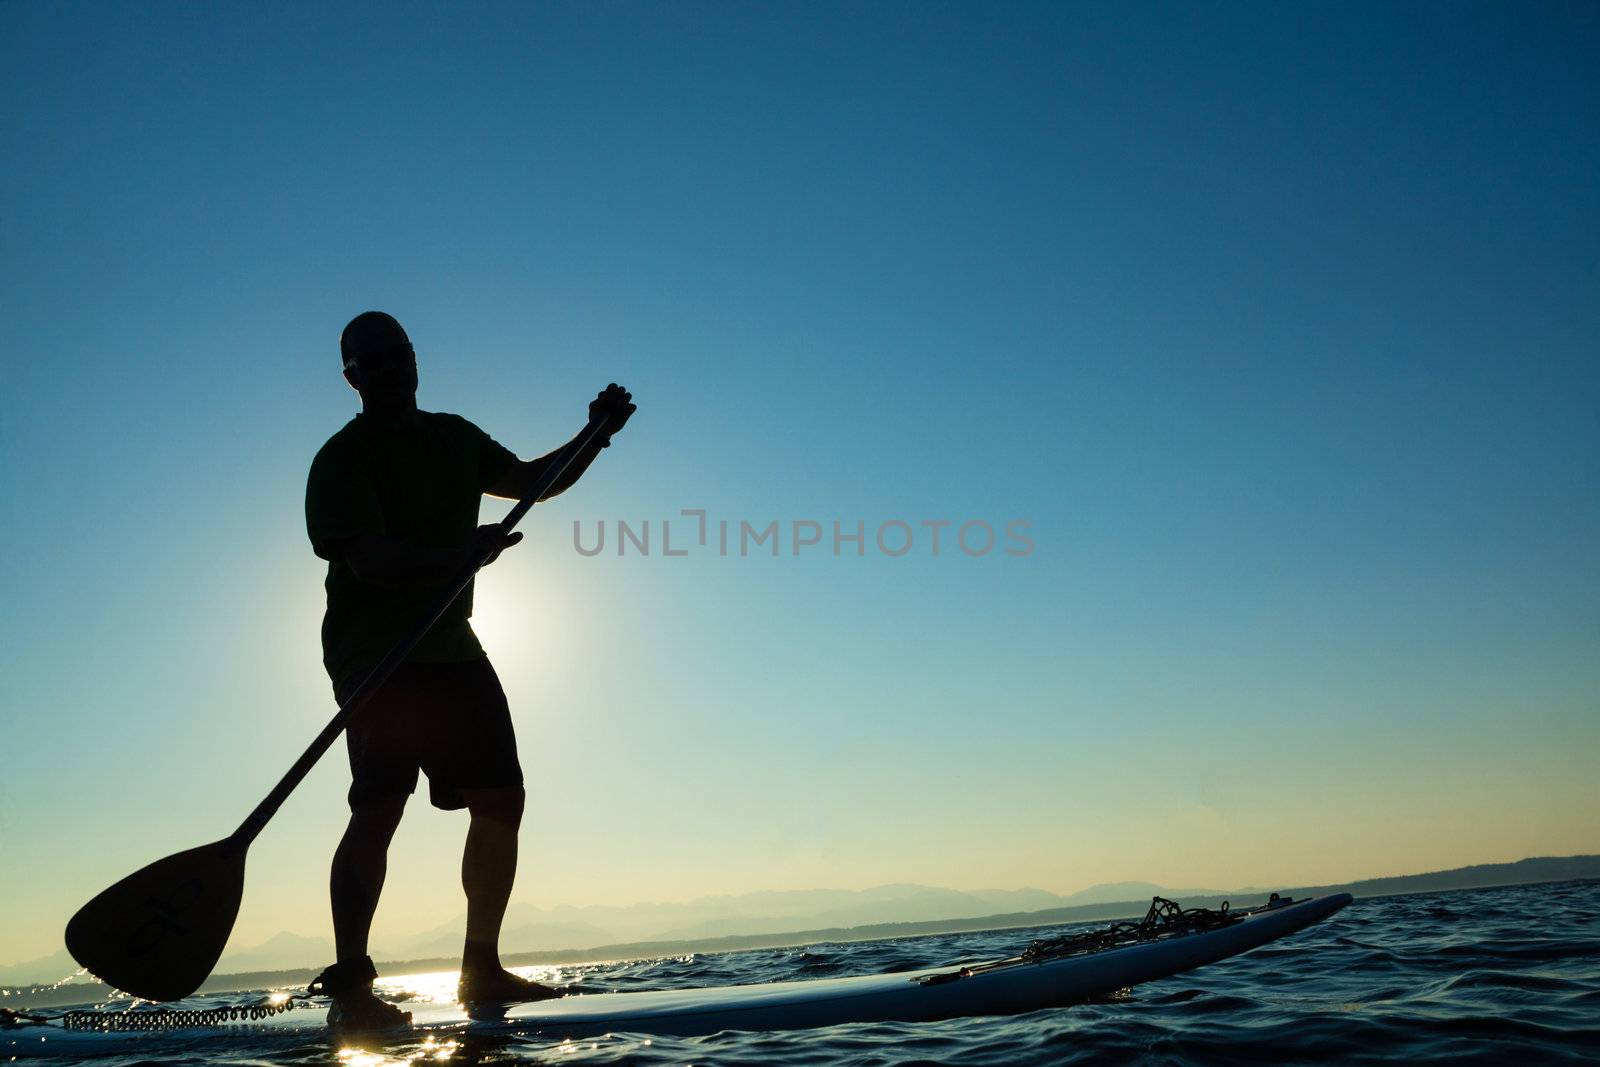 Man paddling stand up paddle board at sunset with blue sky in background.